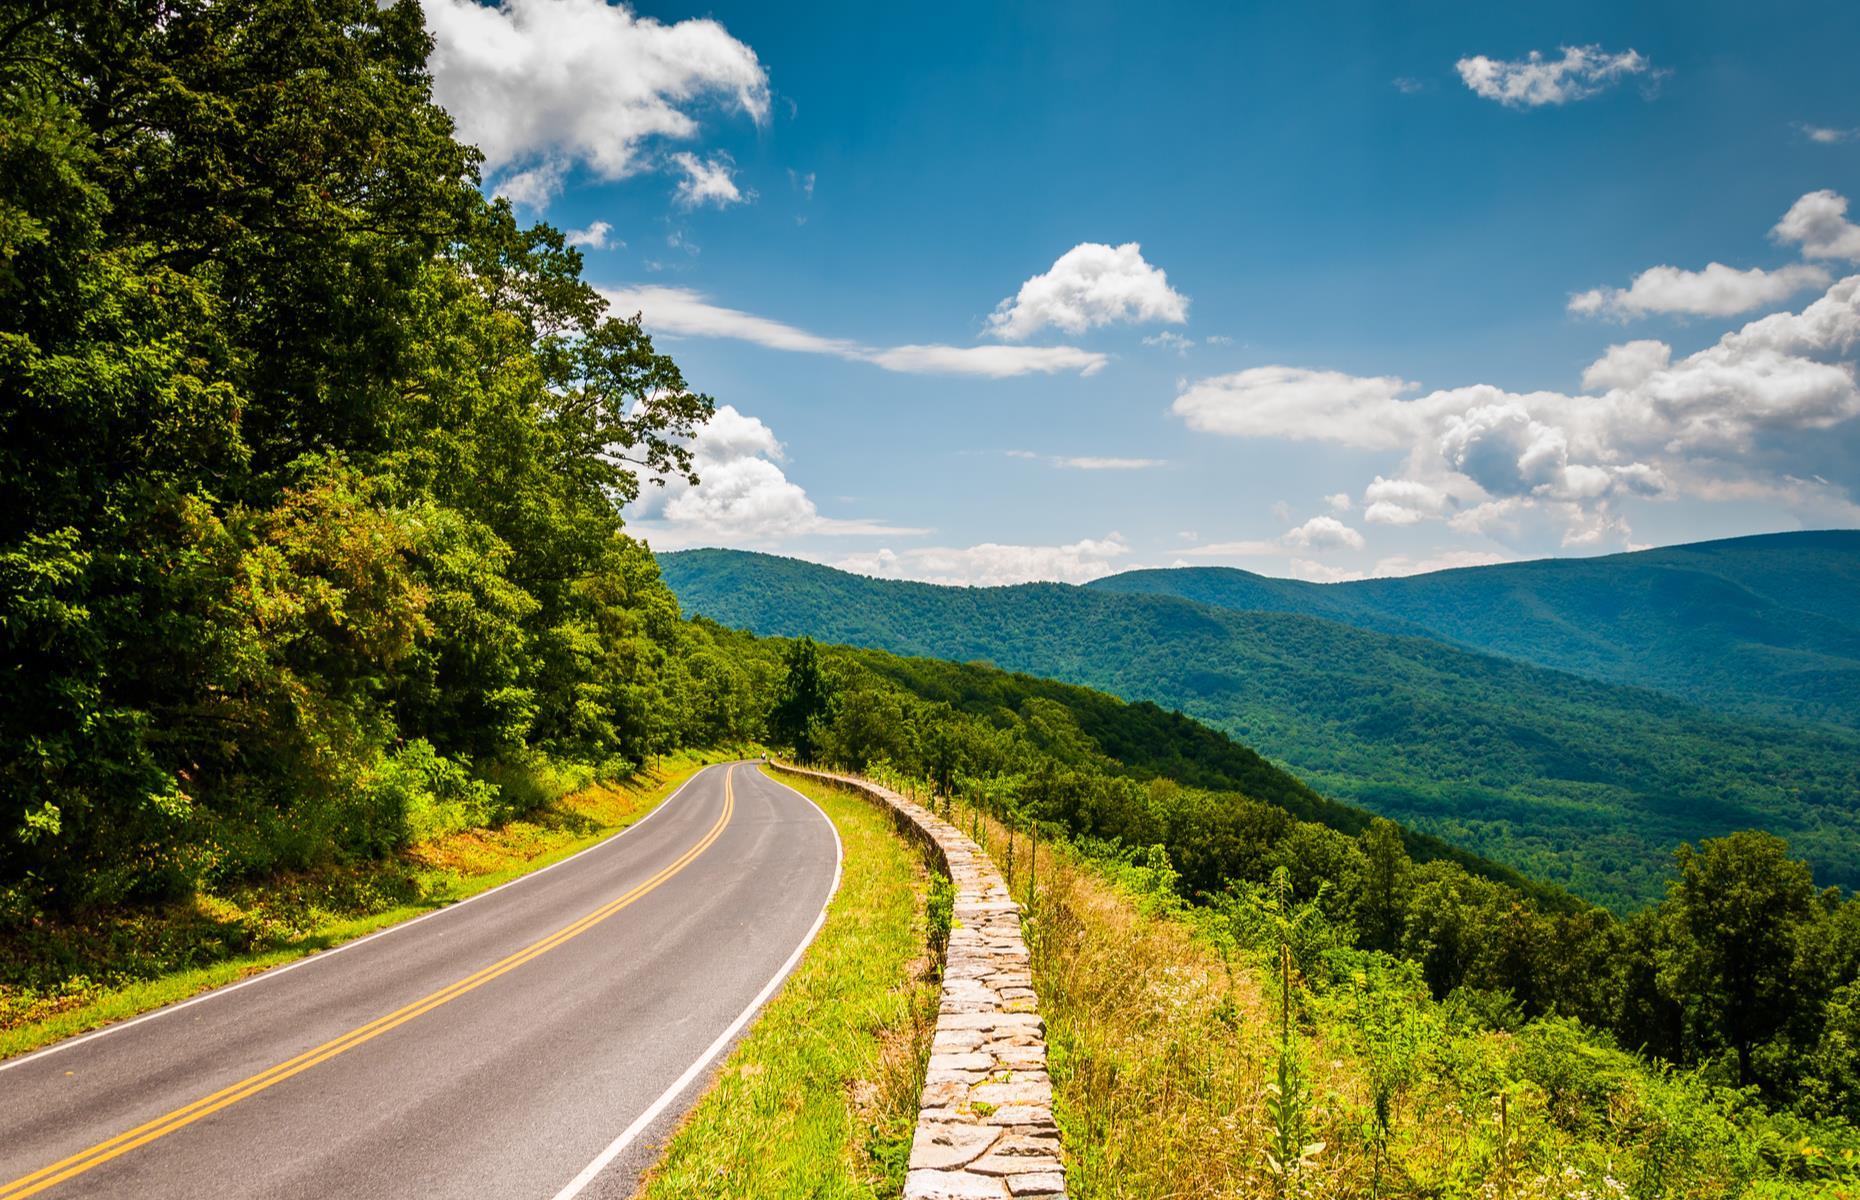 Every corner of the USA has road-trip potential, from its quaint small towns to its breathtaking national parks. Striking out from some of America's top cities, these driving routes are all doable in a long weekend and are perfect for a shorter break closer to home.